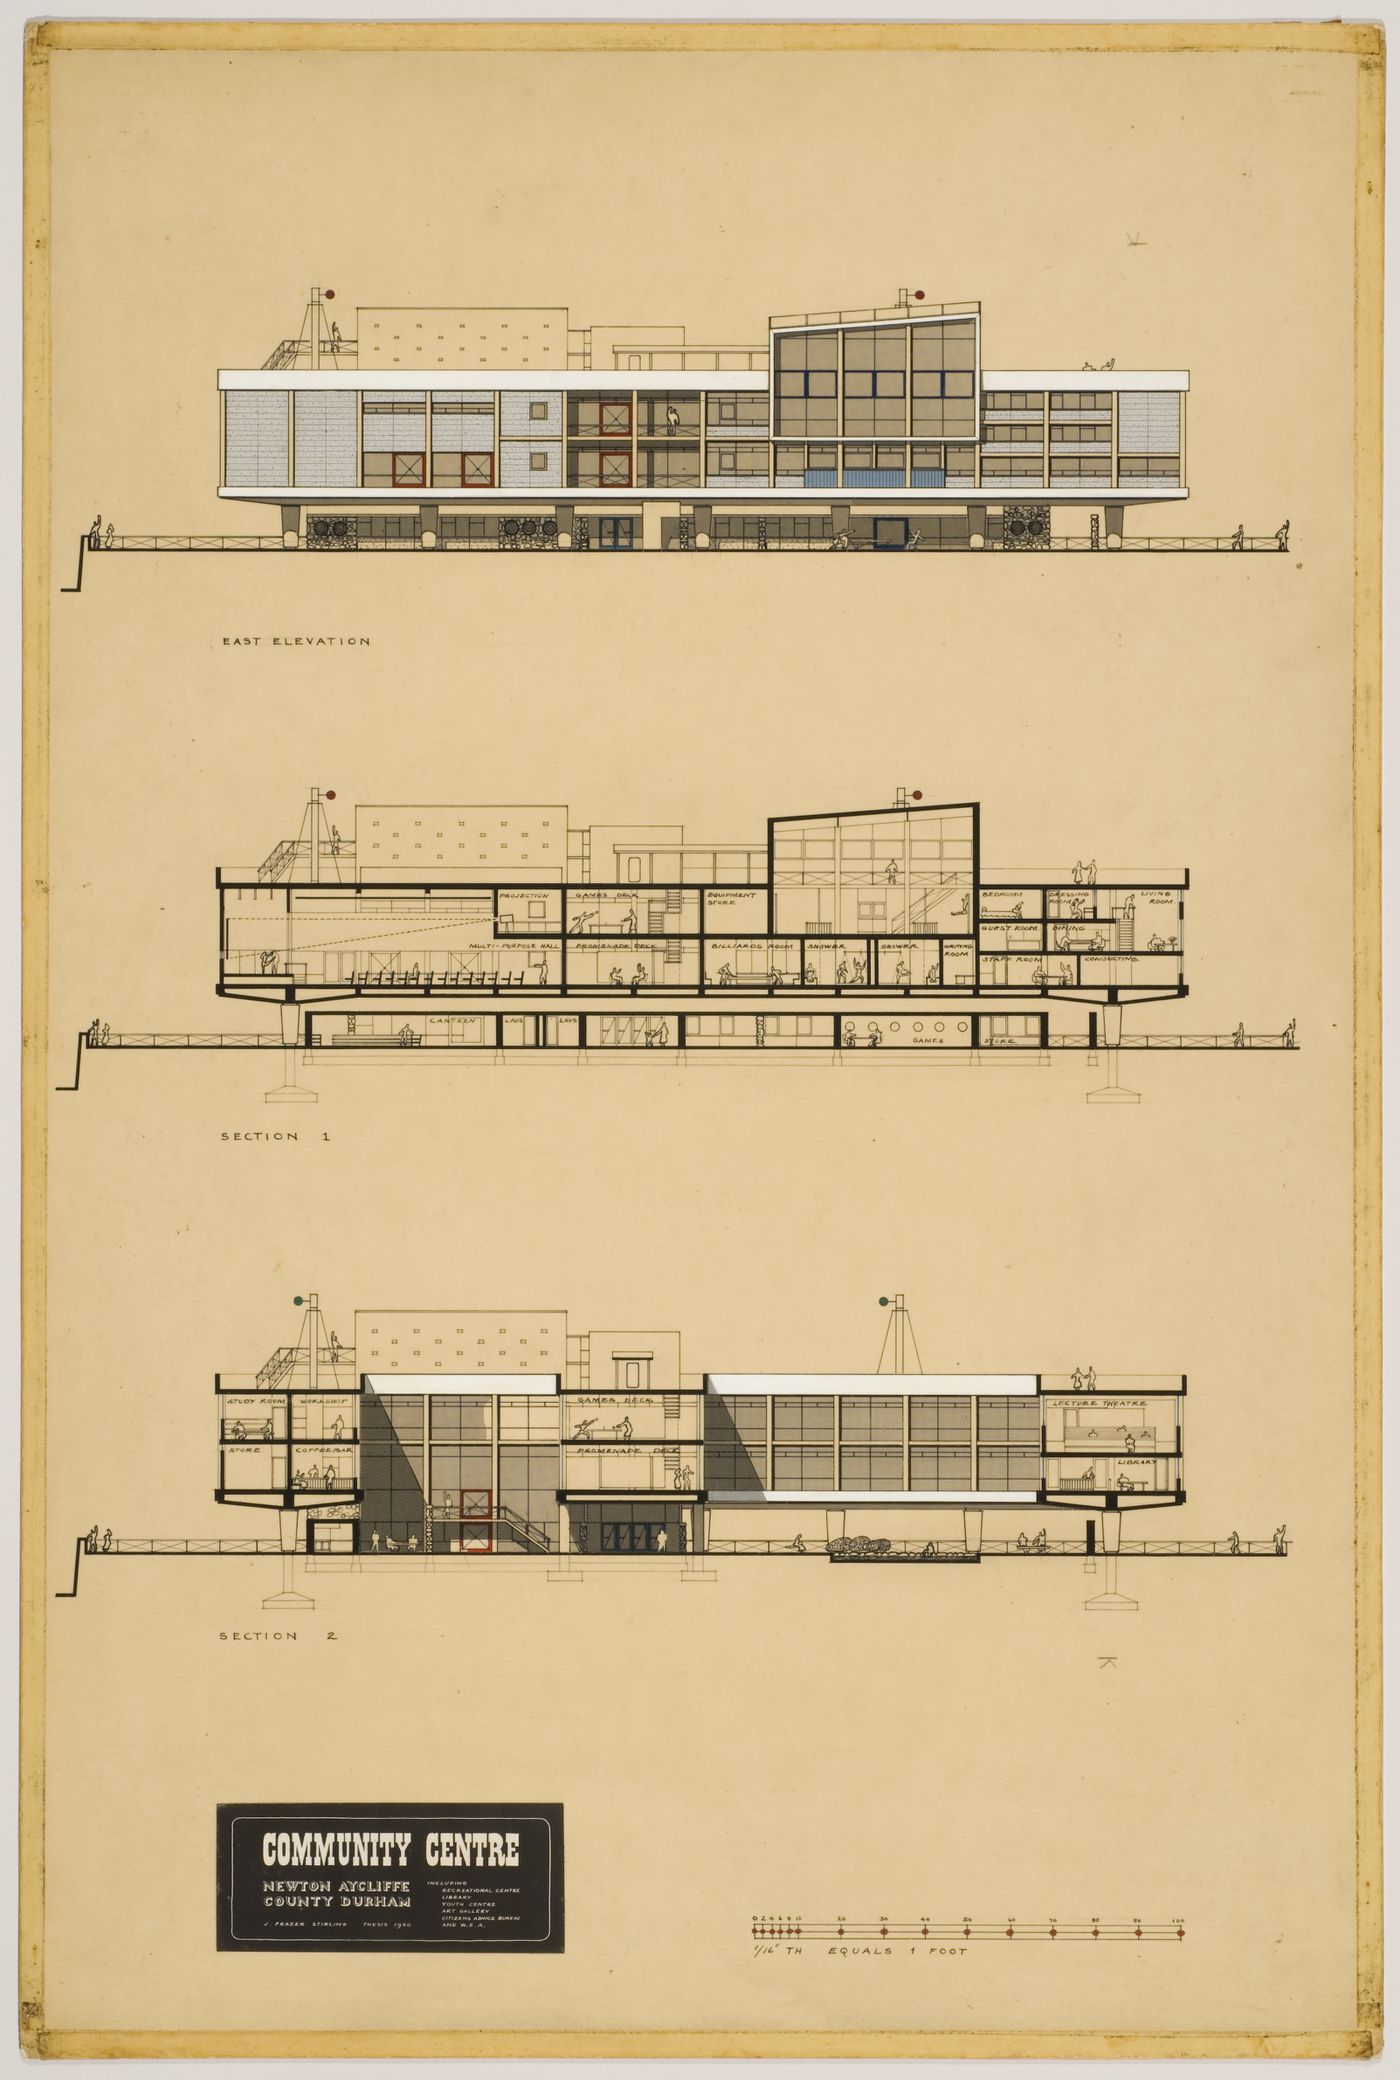 Town centre and community centre, Newton Aycliffe, England (thesis, Liverpool School of Architecture): elevation and sections
